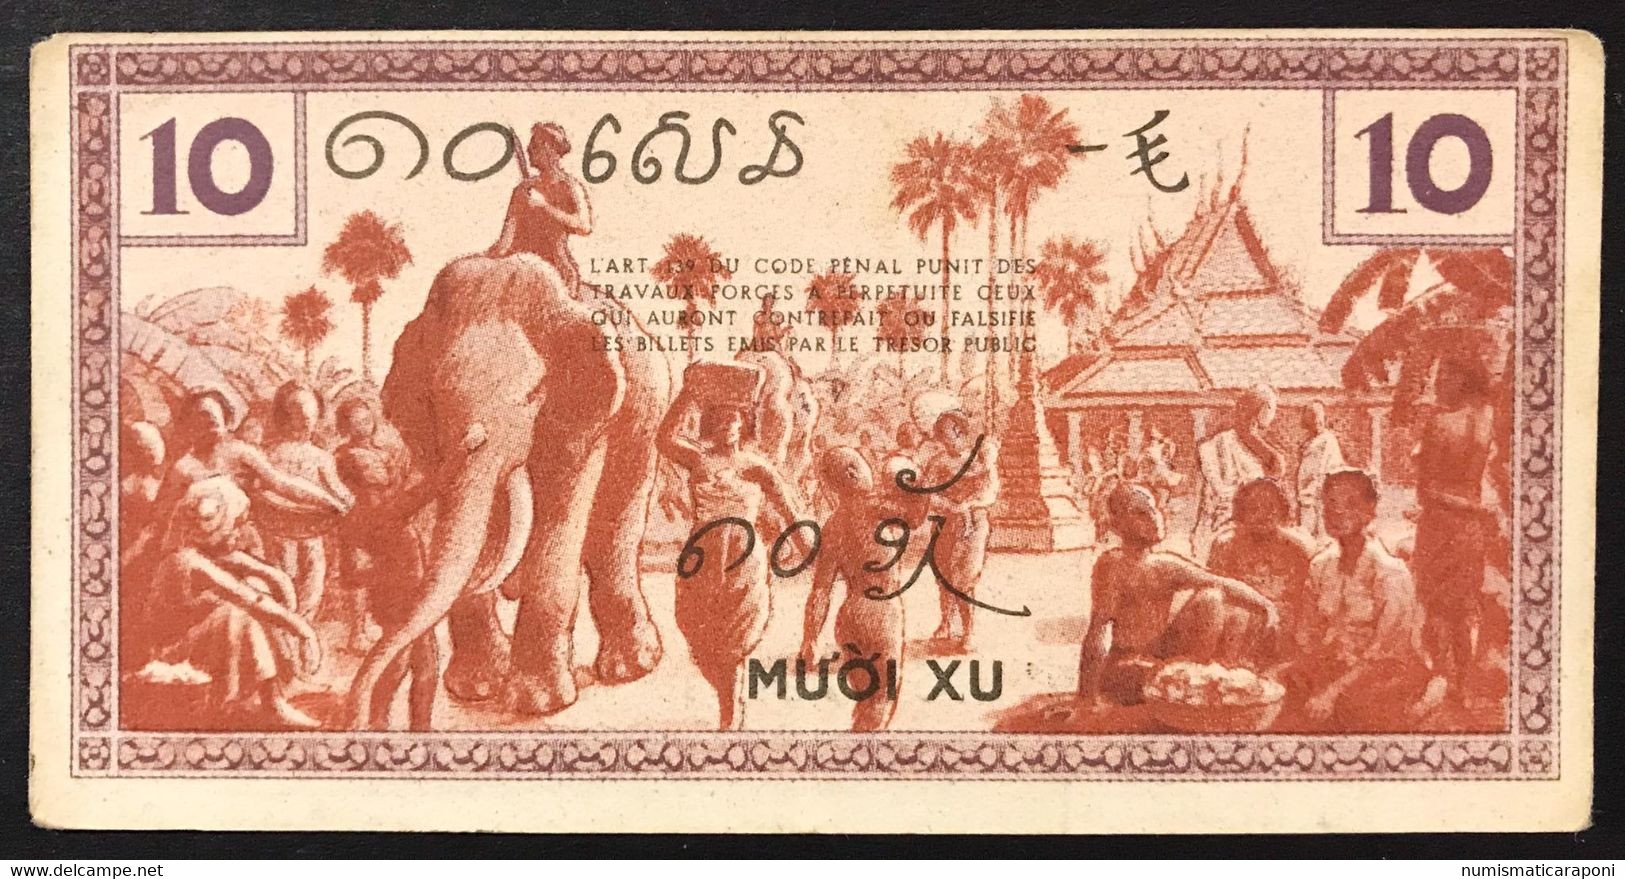 Indo-chine INDOCHINE FRANÇAISE FRENCH INDOCHINA  10 Cents 1939  LOTTO 2009 - Otros – Asia